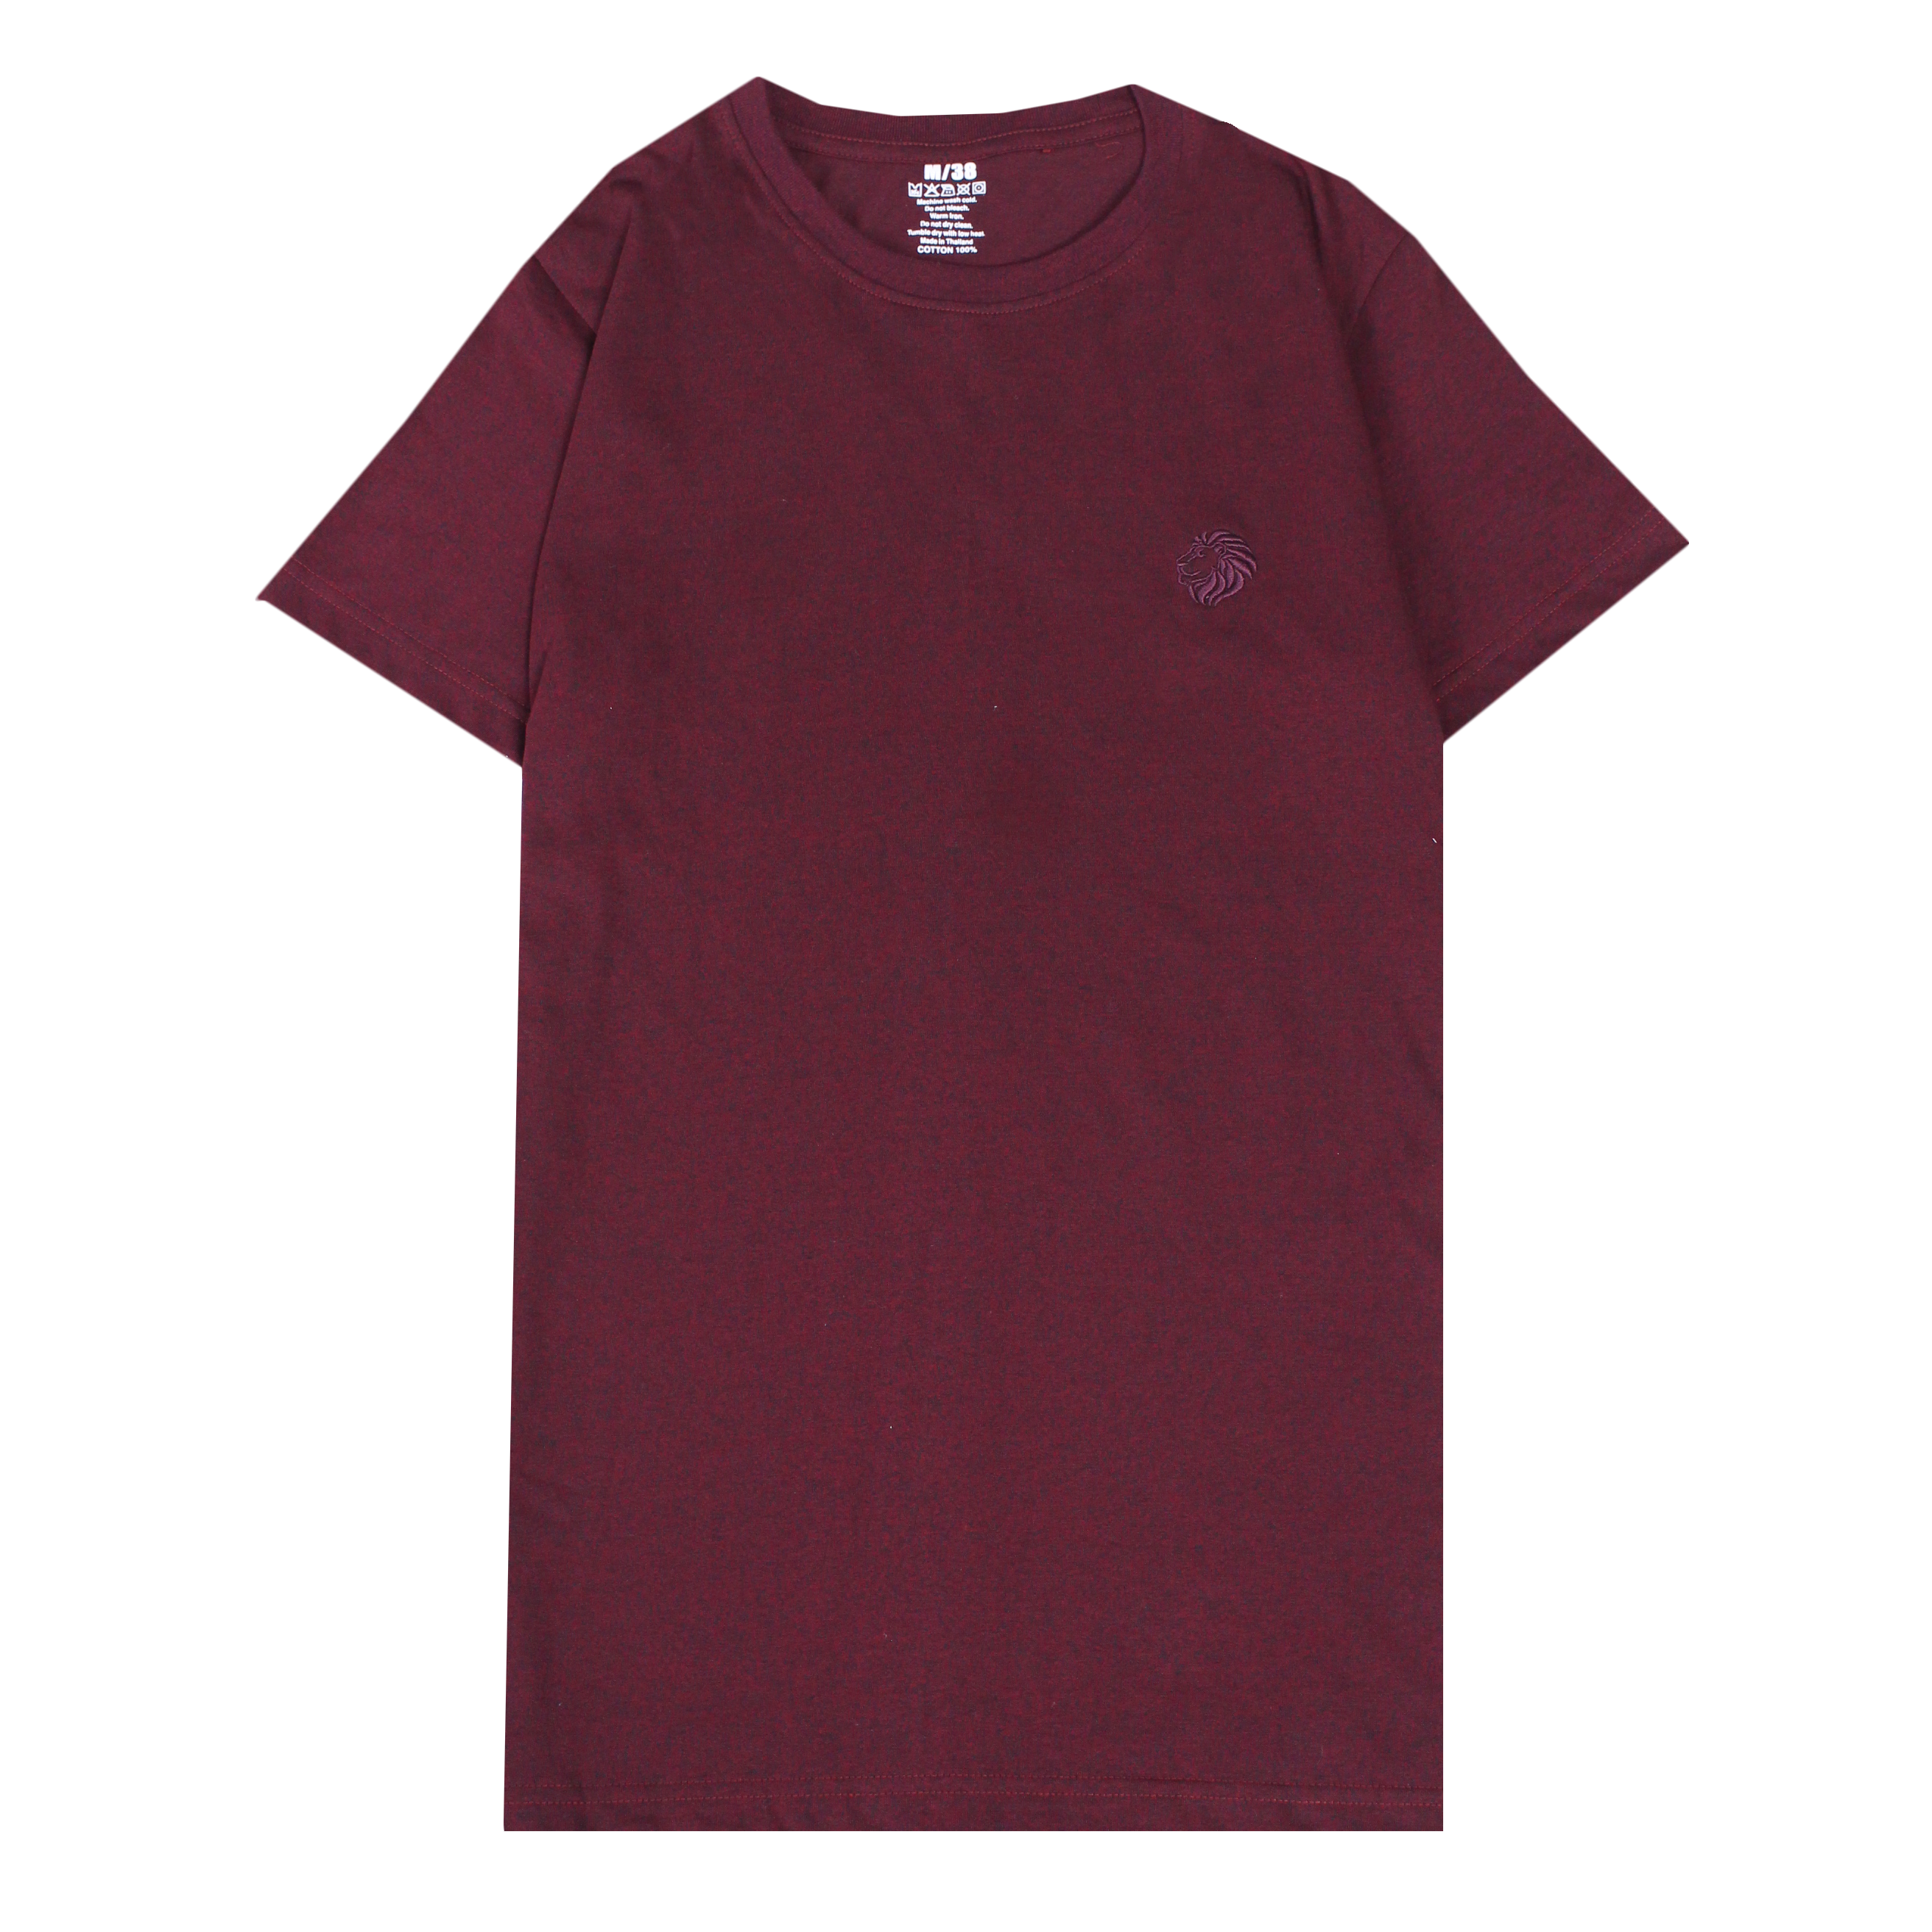 T Shirt with logo Comfort cotton